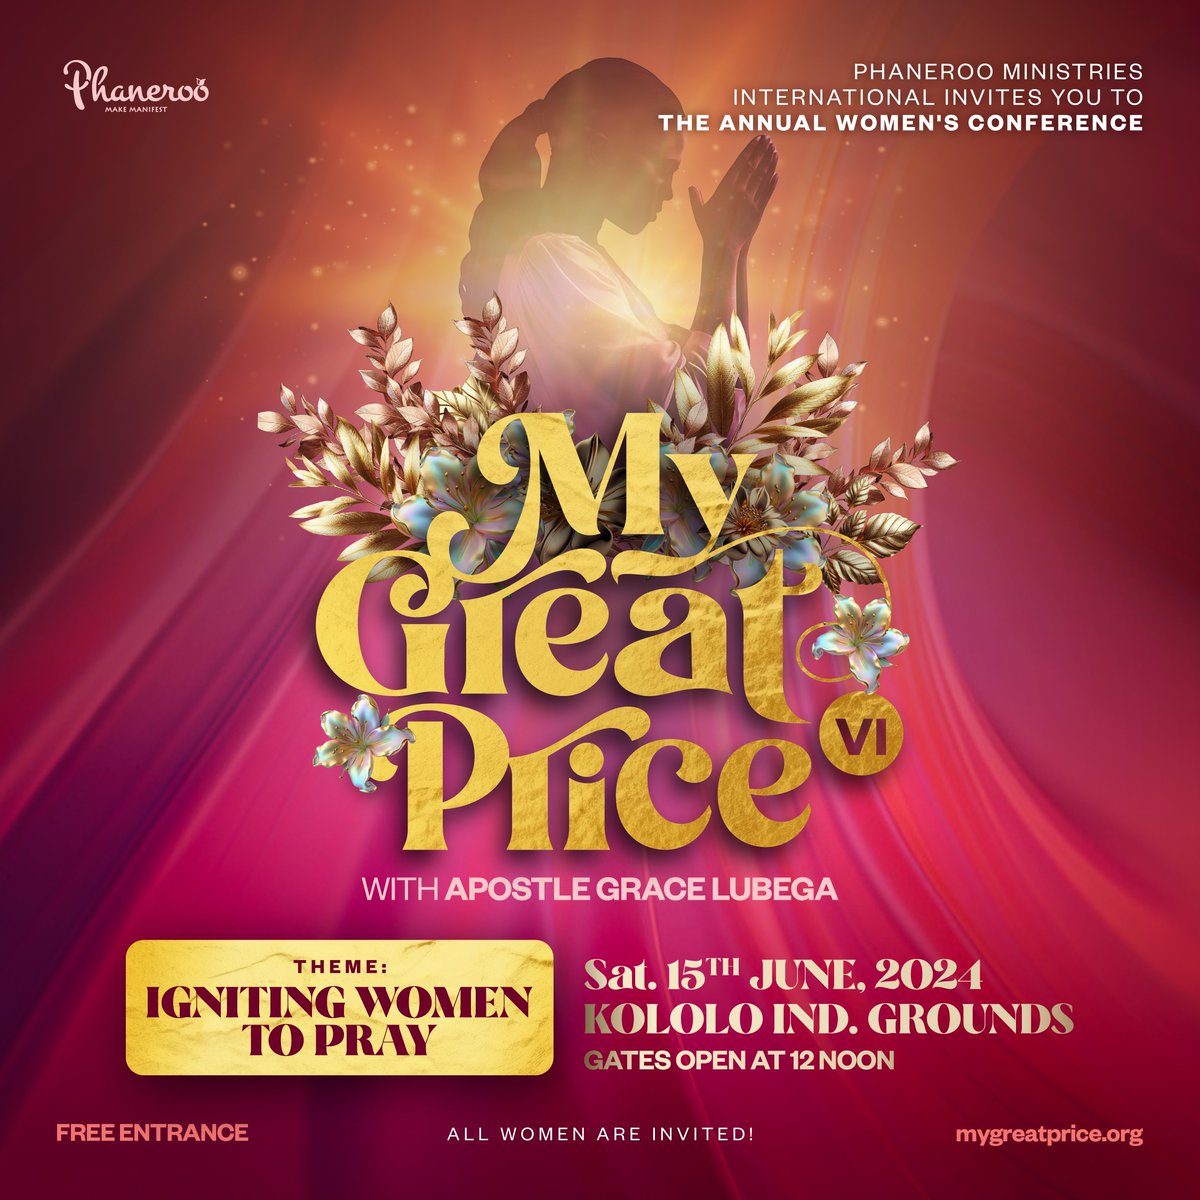 When women pray, the realms respond: strongholds are broken, circumstances are changed, healing takes place, and miracles happen to the glory of God. Prayer changes things! Phaneroo Ministries International invites all women to the Annual Women's conference, My Great Price VI,…